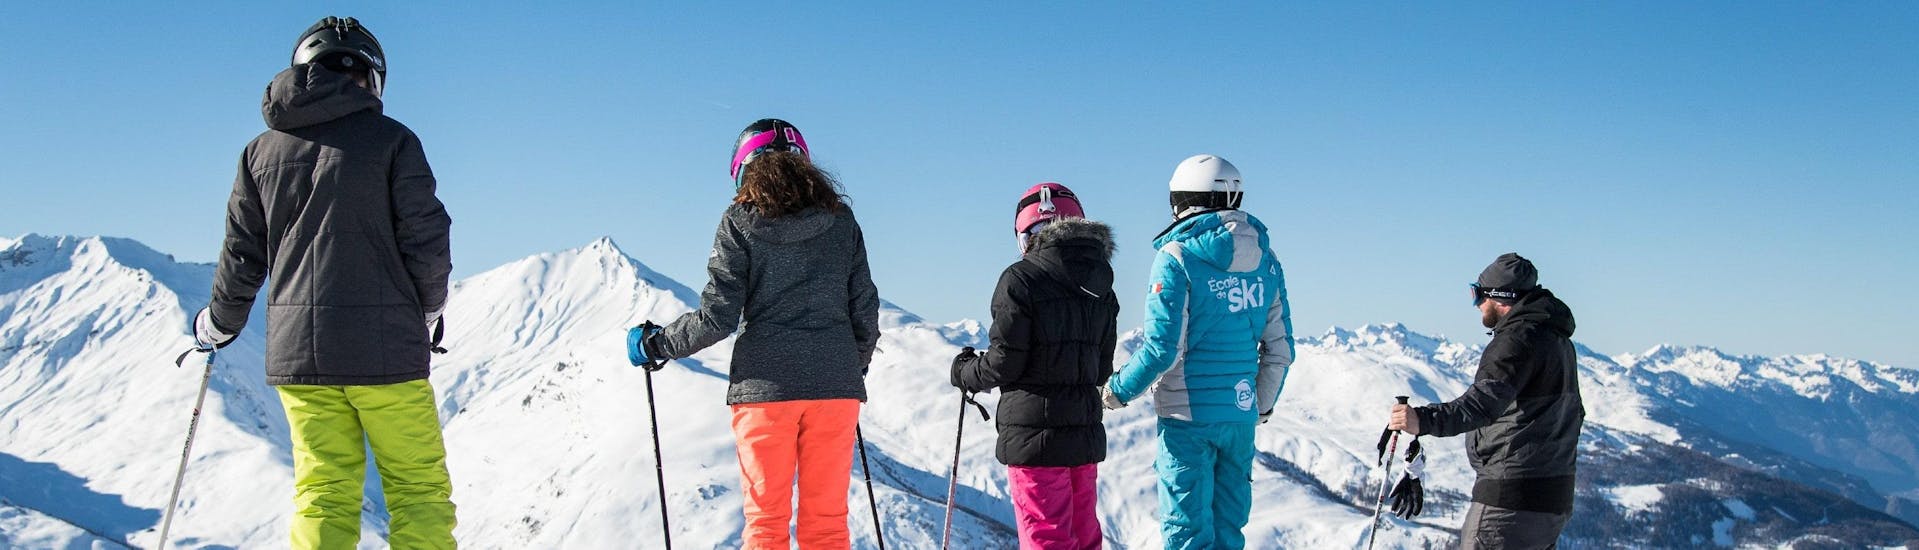 ski-lessons-for-adults-all-levels-esi-les-orres-hero